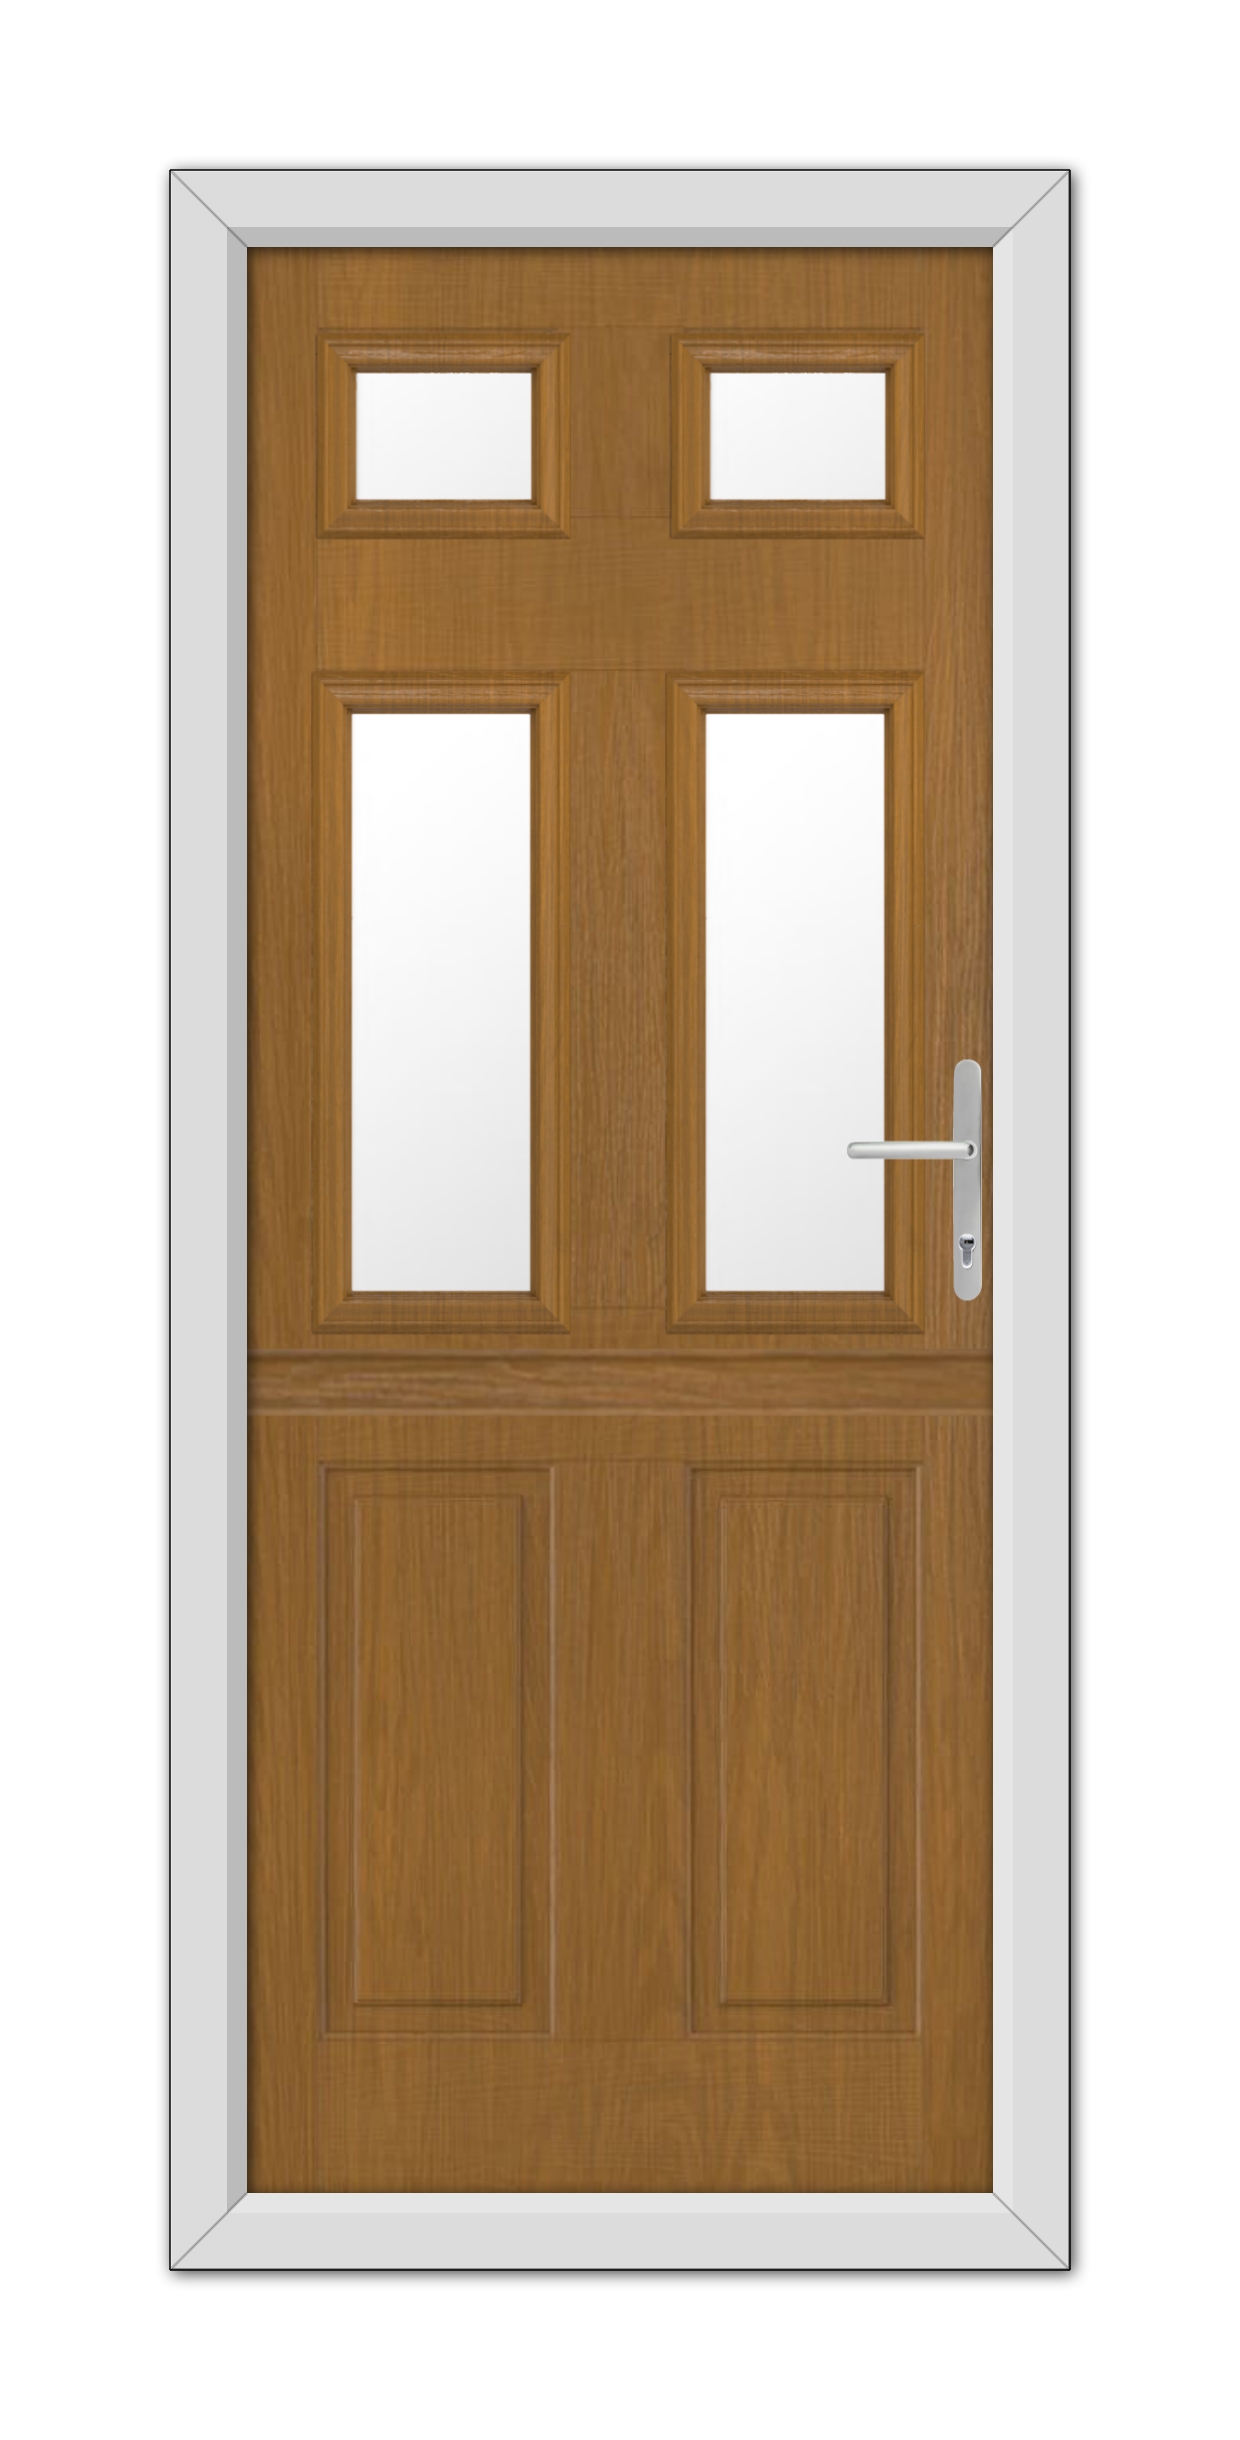 A modern Oak Middleton Glazed 4 Stable composite door with two square glass panels at the top, a metal handle on the right, and a white frame.